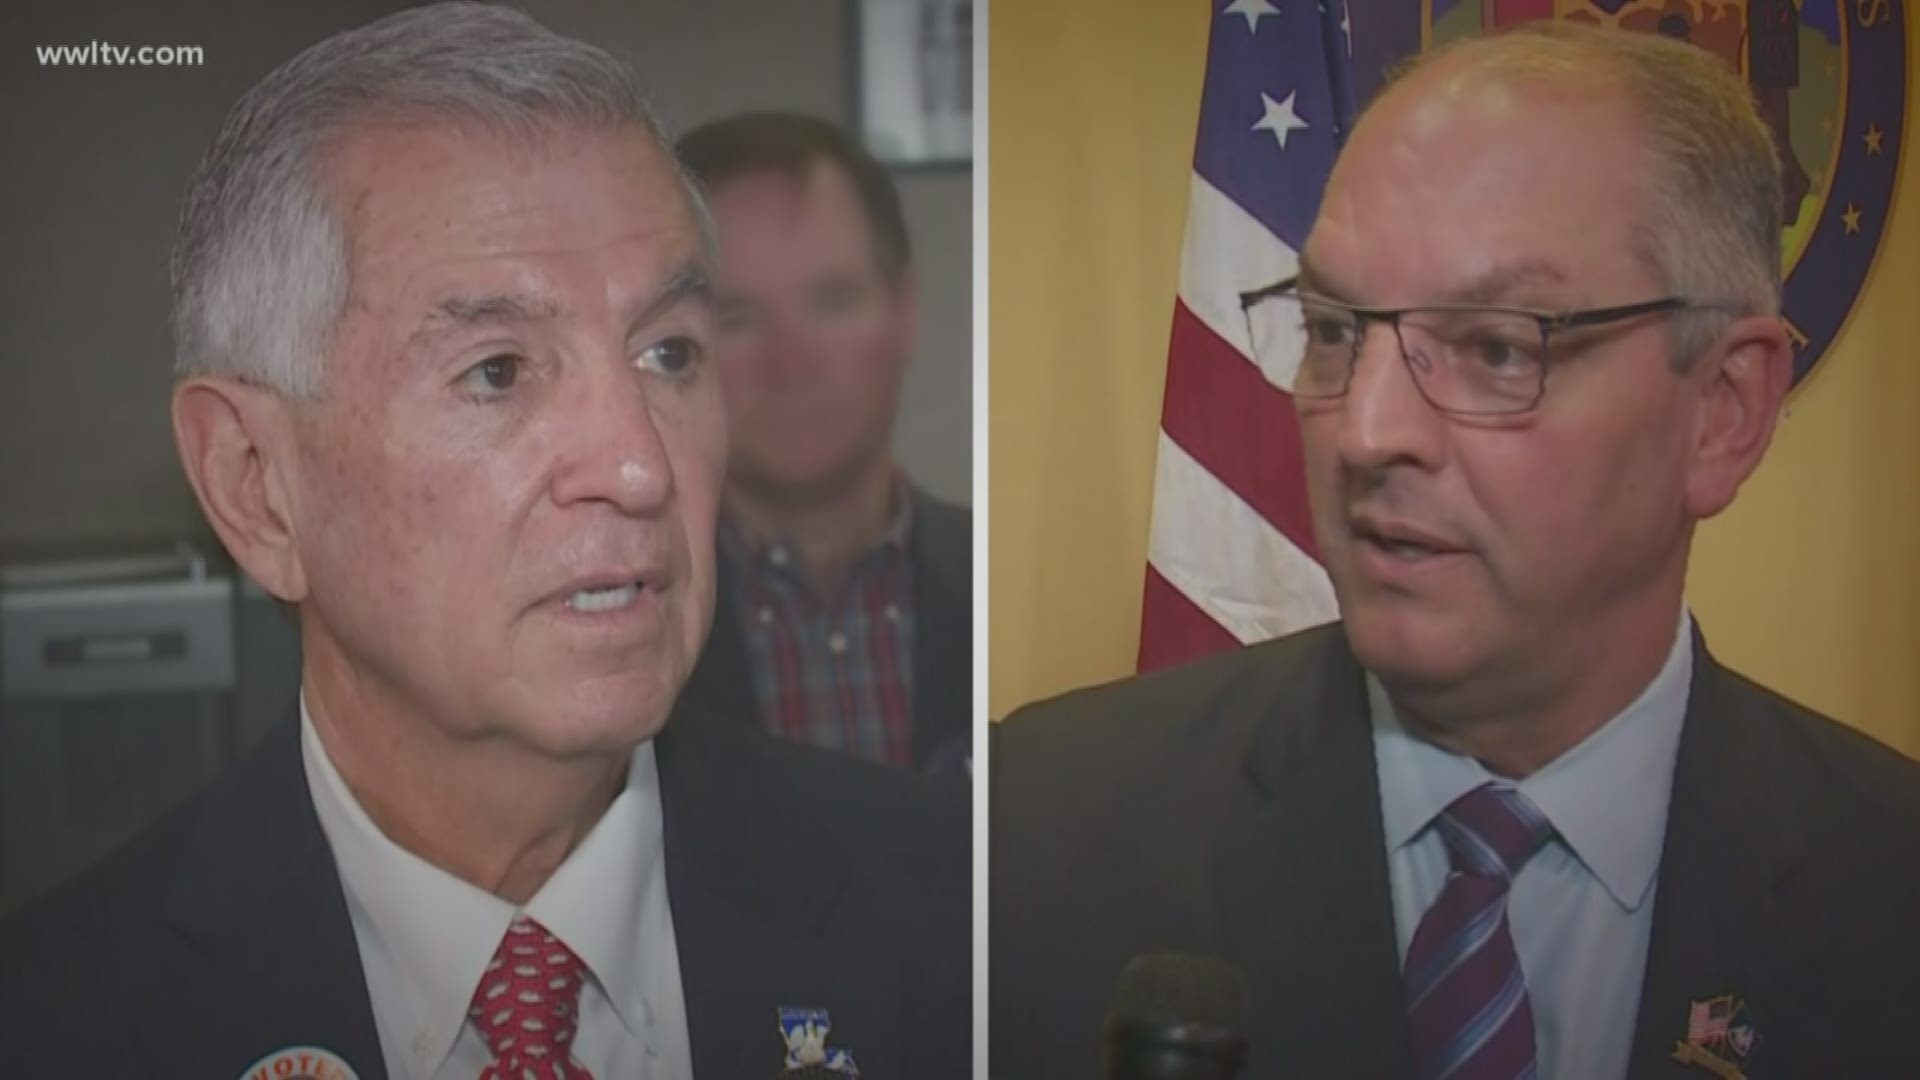 The campaign for Democratic incumbent John Bel Edwards made it clear it's not responsible for the ad by BOLD.